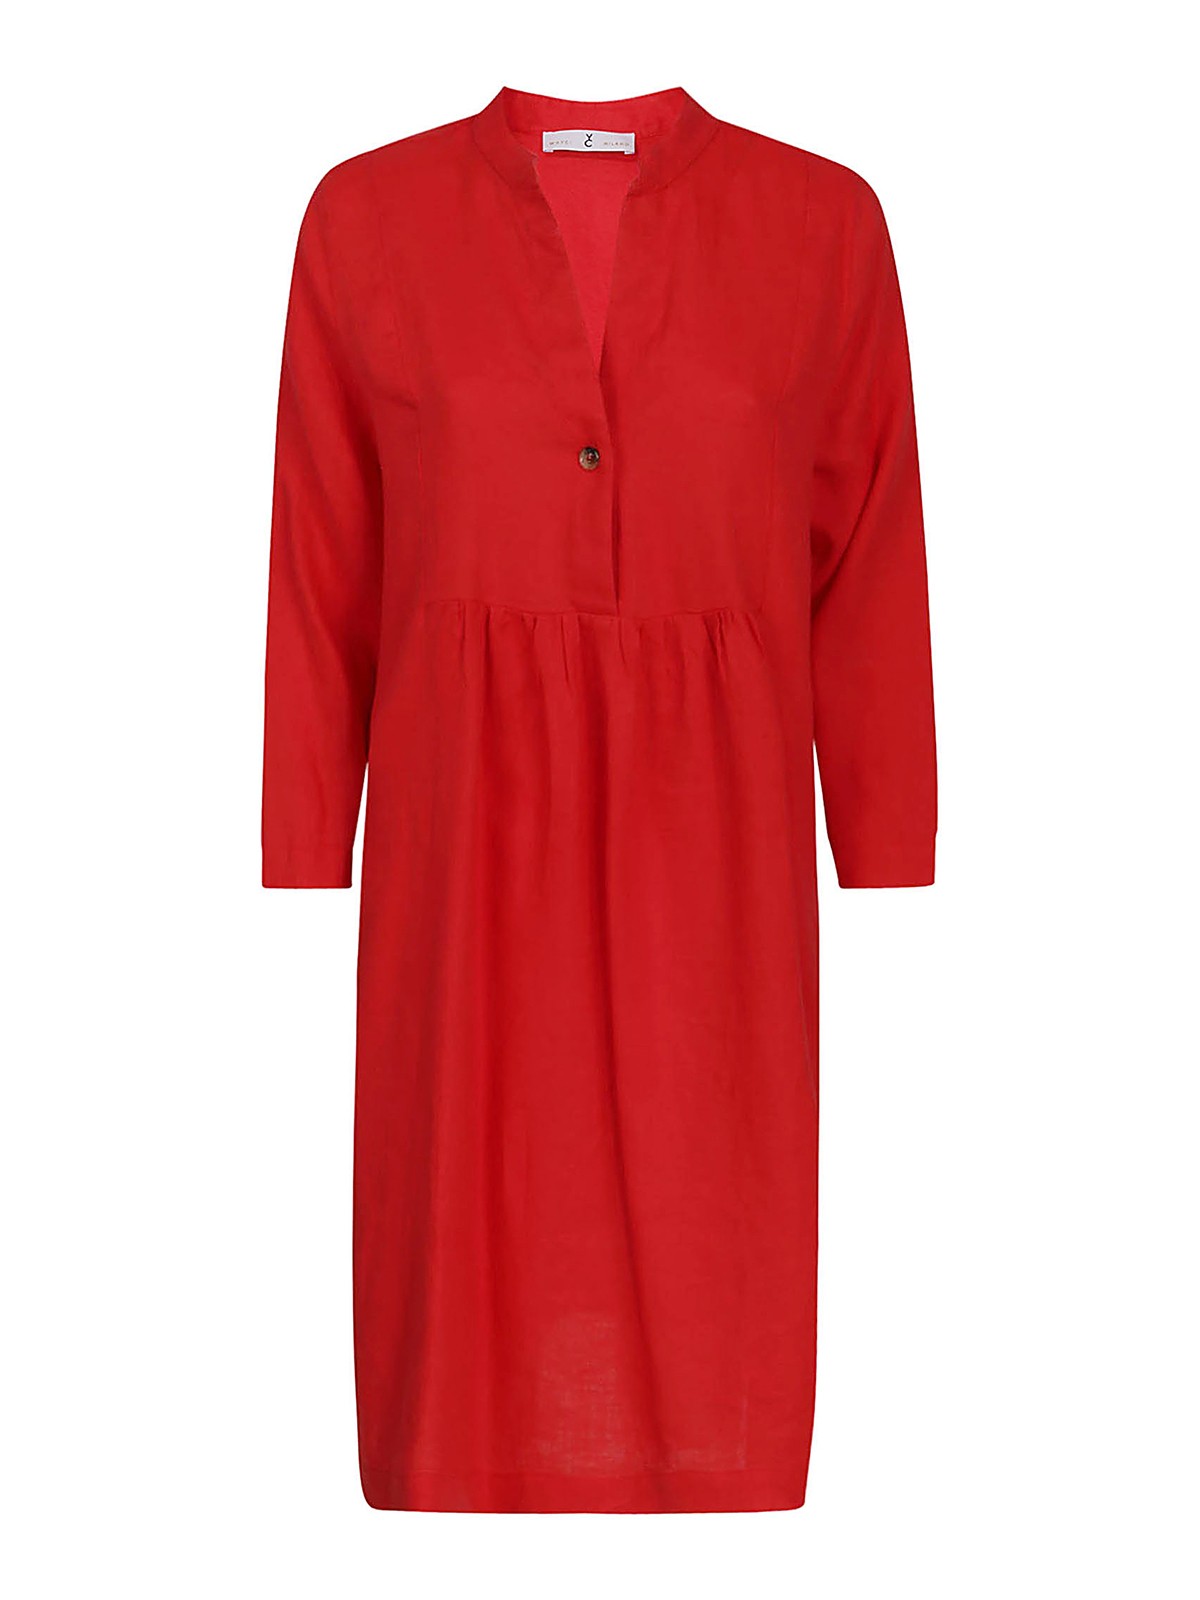 Whyci Dress Shirt In Red